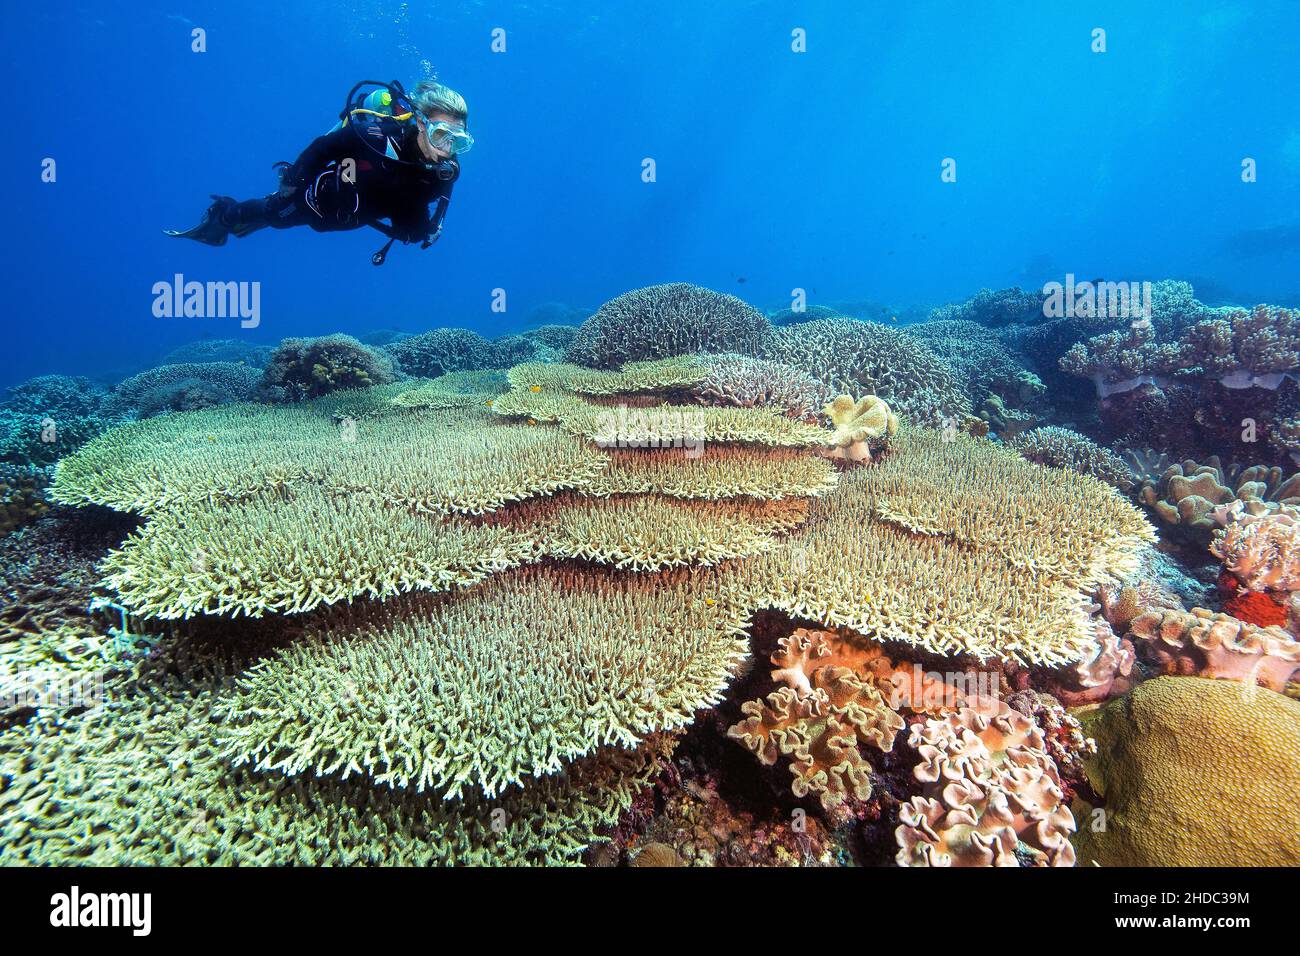 Diver looking up dives over intact hyacinth table coral (Acropora hyacinthus) in living coral reef, Apo Reef, Dumaguete, Negros, Visayas, Philippines Stock Photo